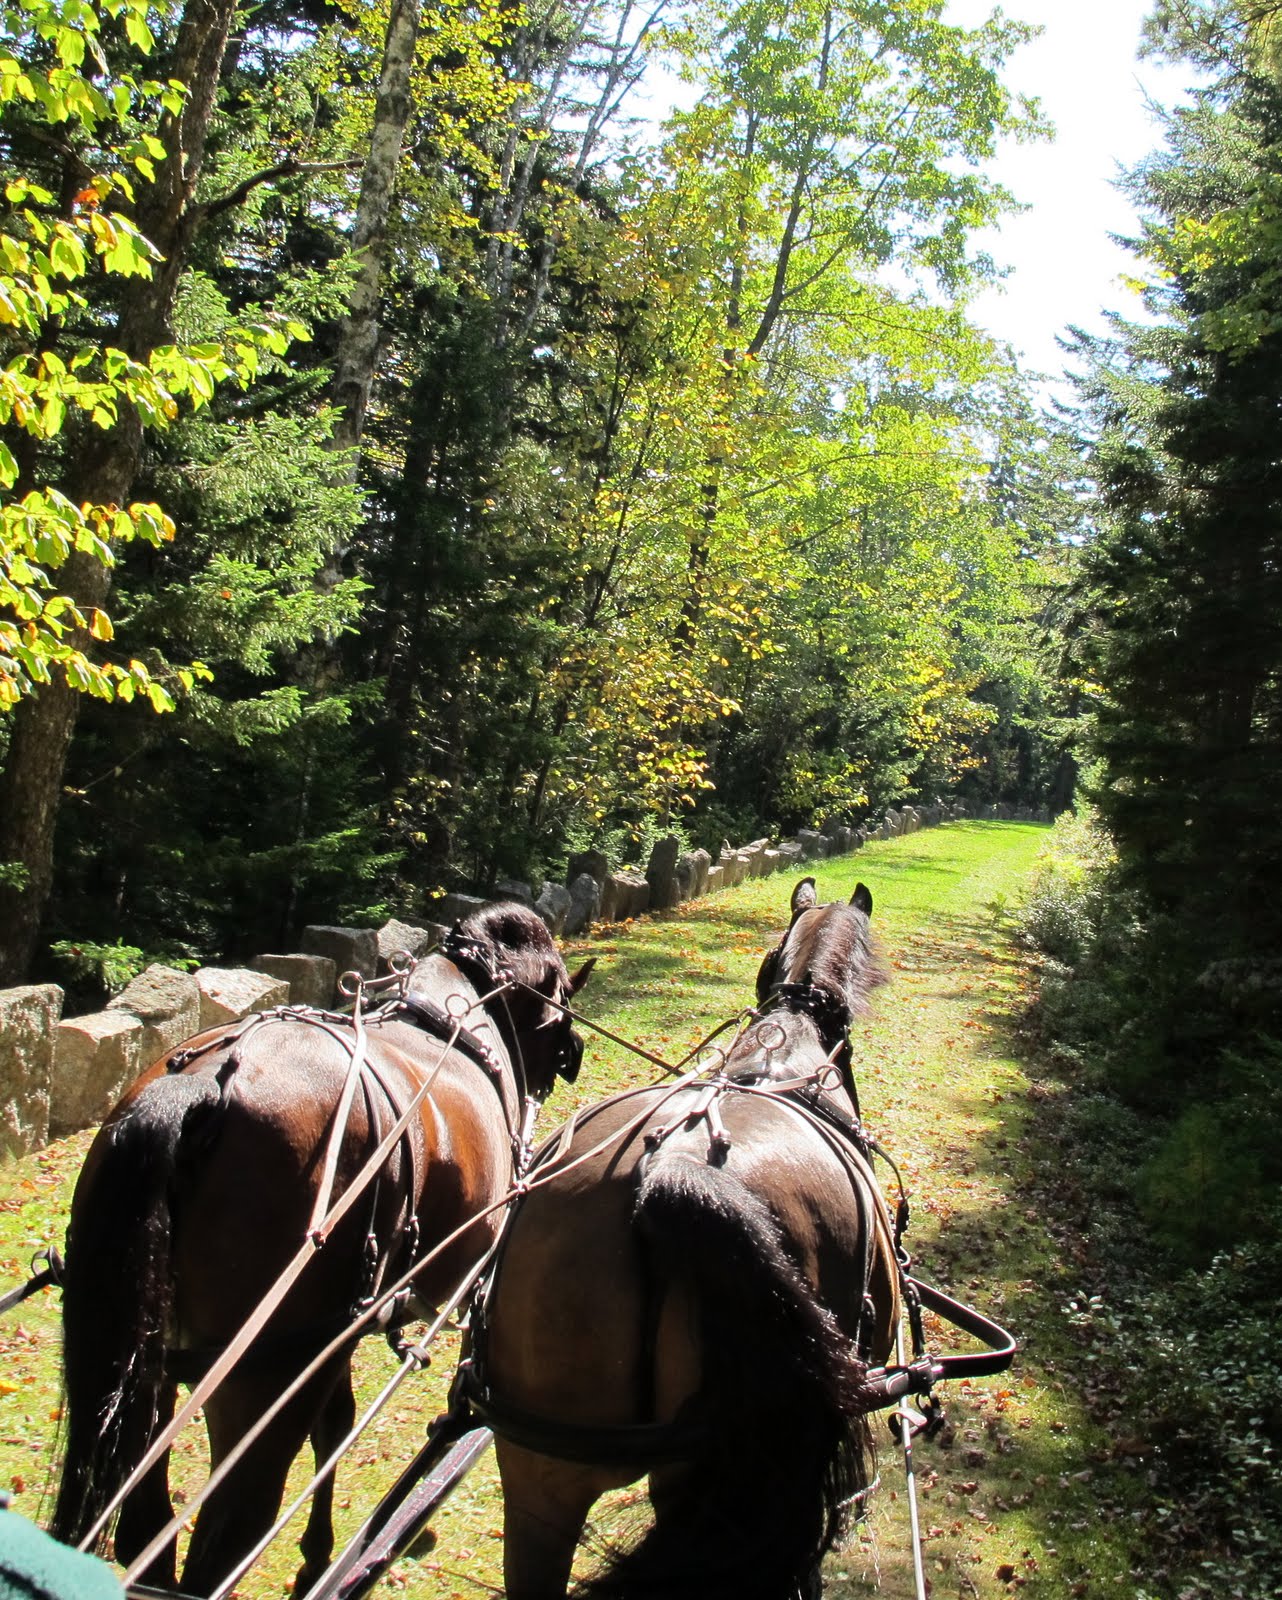 Carriages of Acadia - Home page for horse carriage rides at Acadia